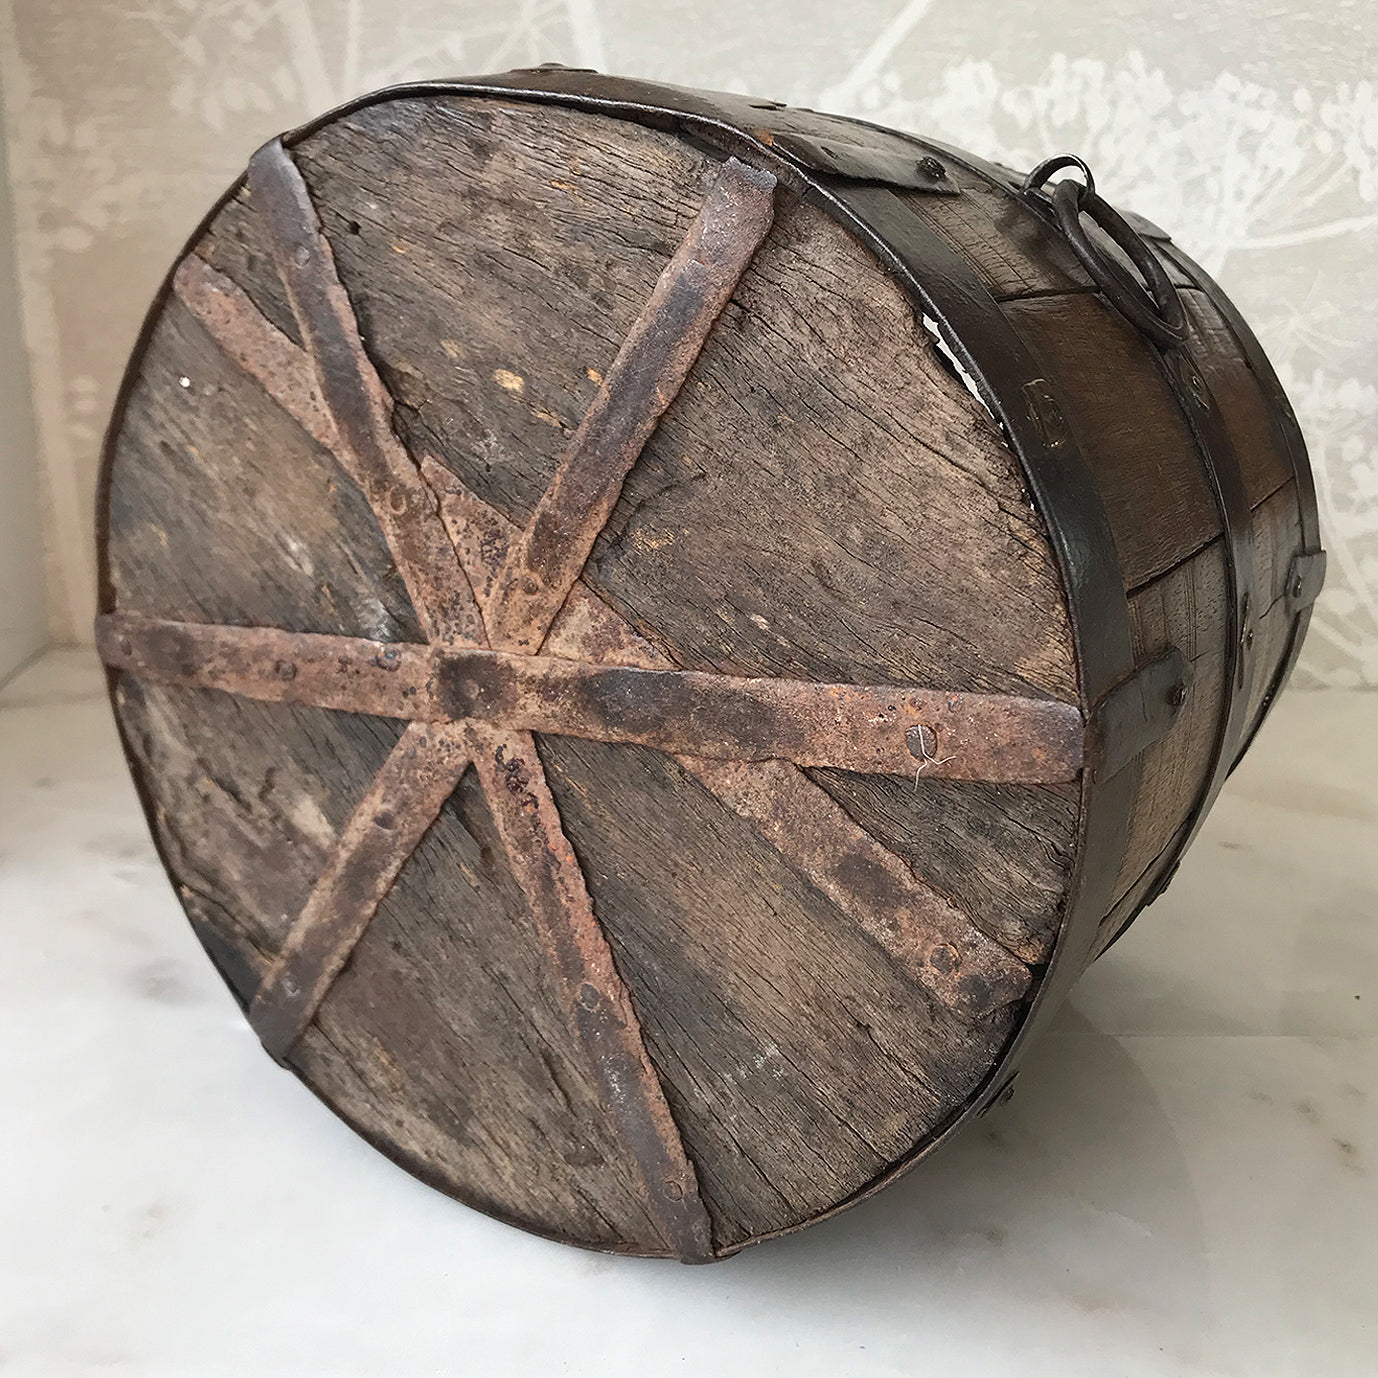 A true surviver this. A loved wooden vessel that has been very well looked after over the years. Hand made from oak, steel and brass. It has 3 steel handmade rings with handmade nails and crude squarish brass washers holding together the oak slats - SHOP NOW - www.intovintage.co.uk